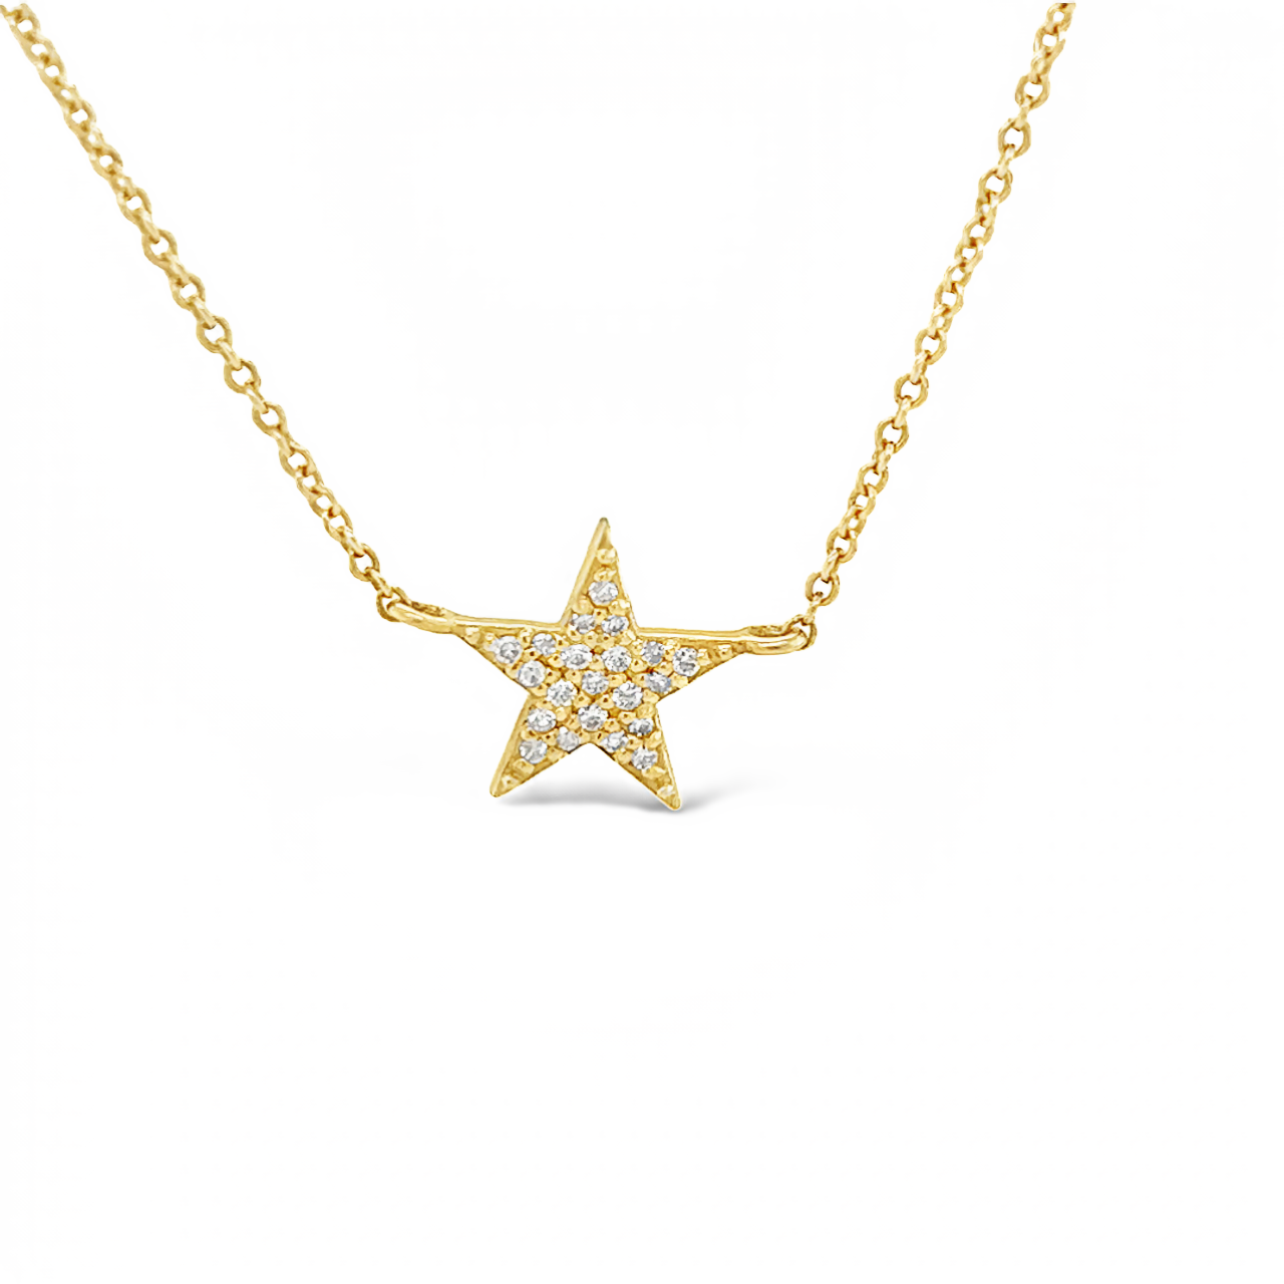 Featured image for “Baby Shining Star Necklace”